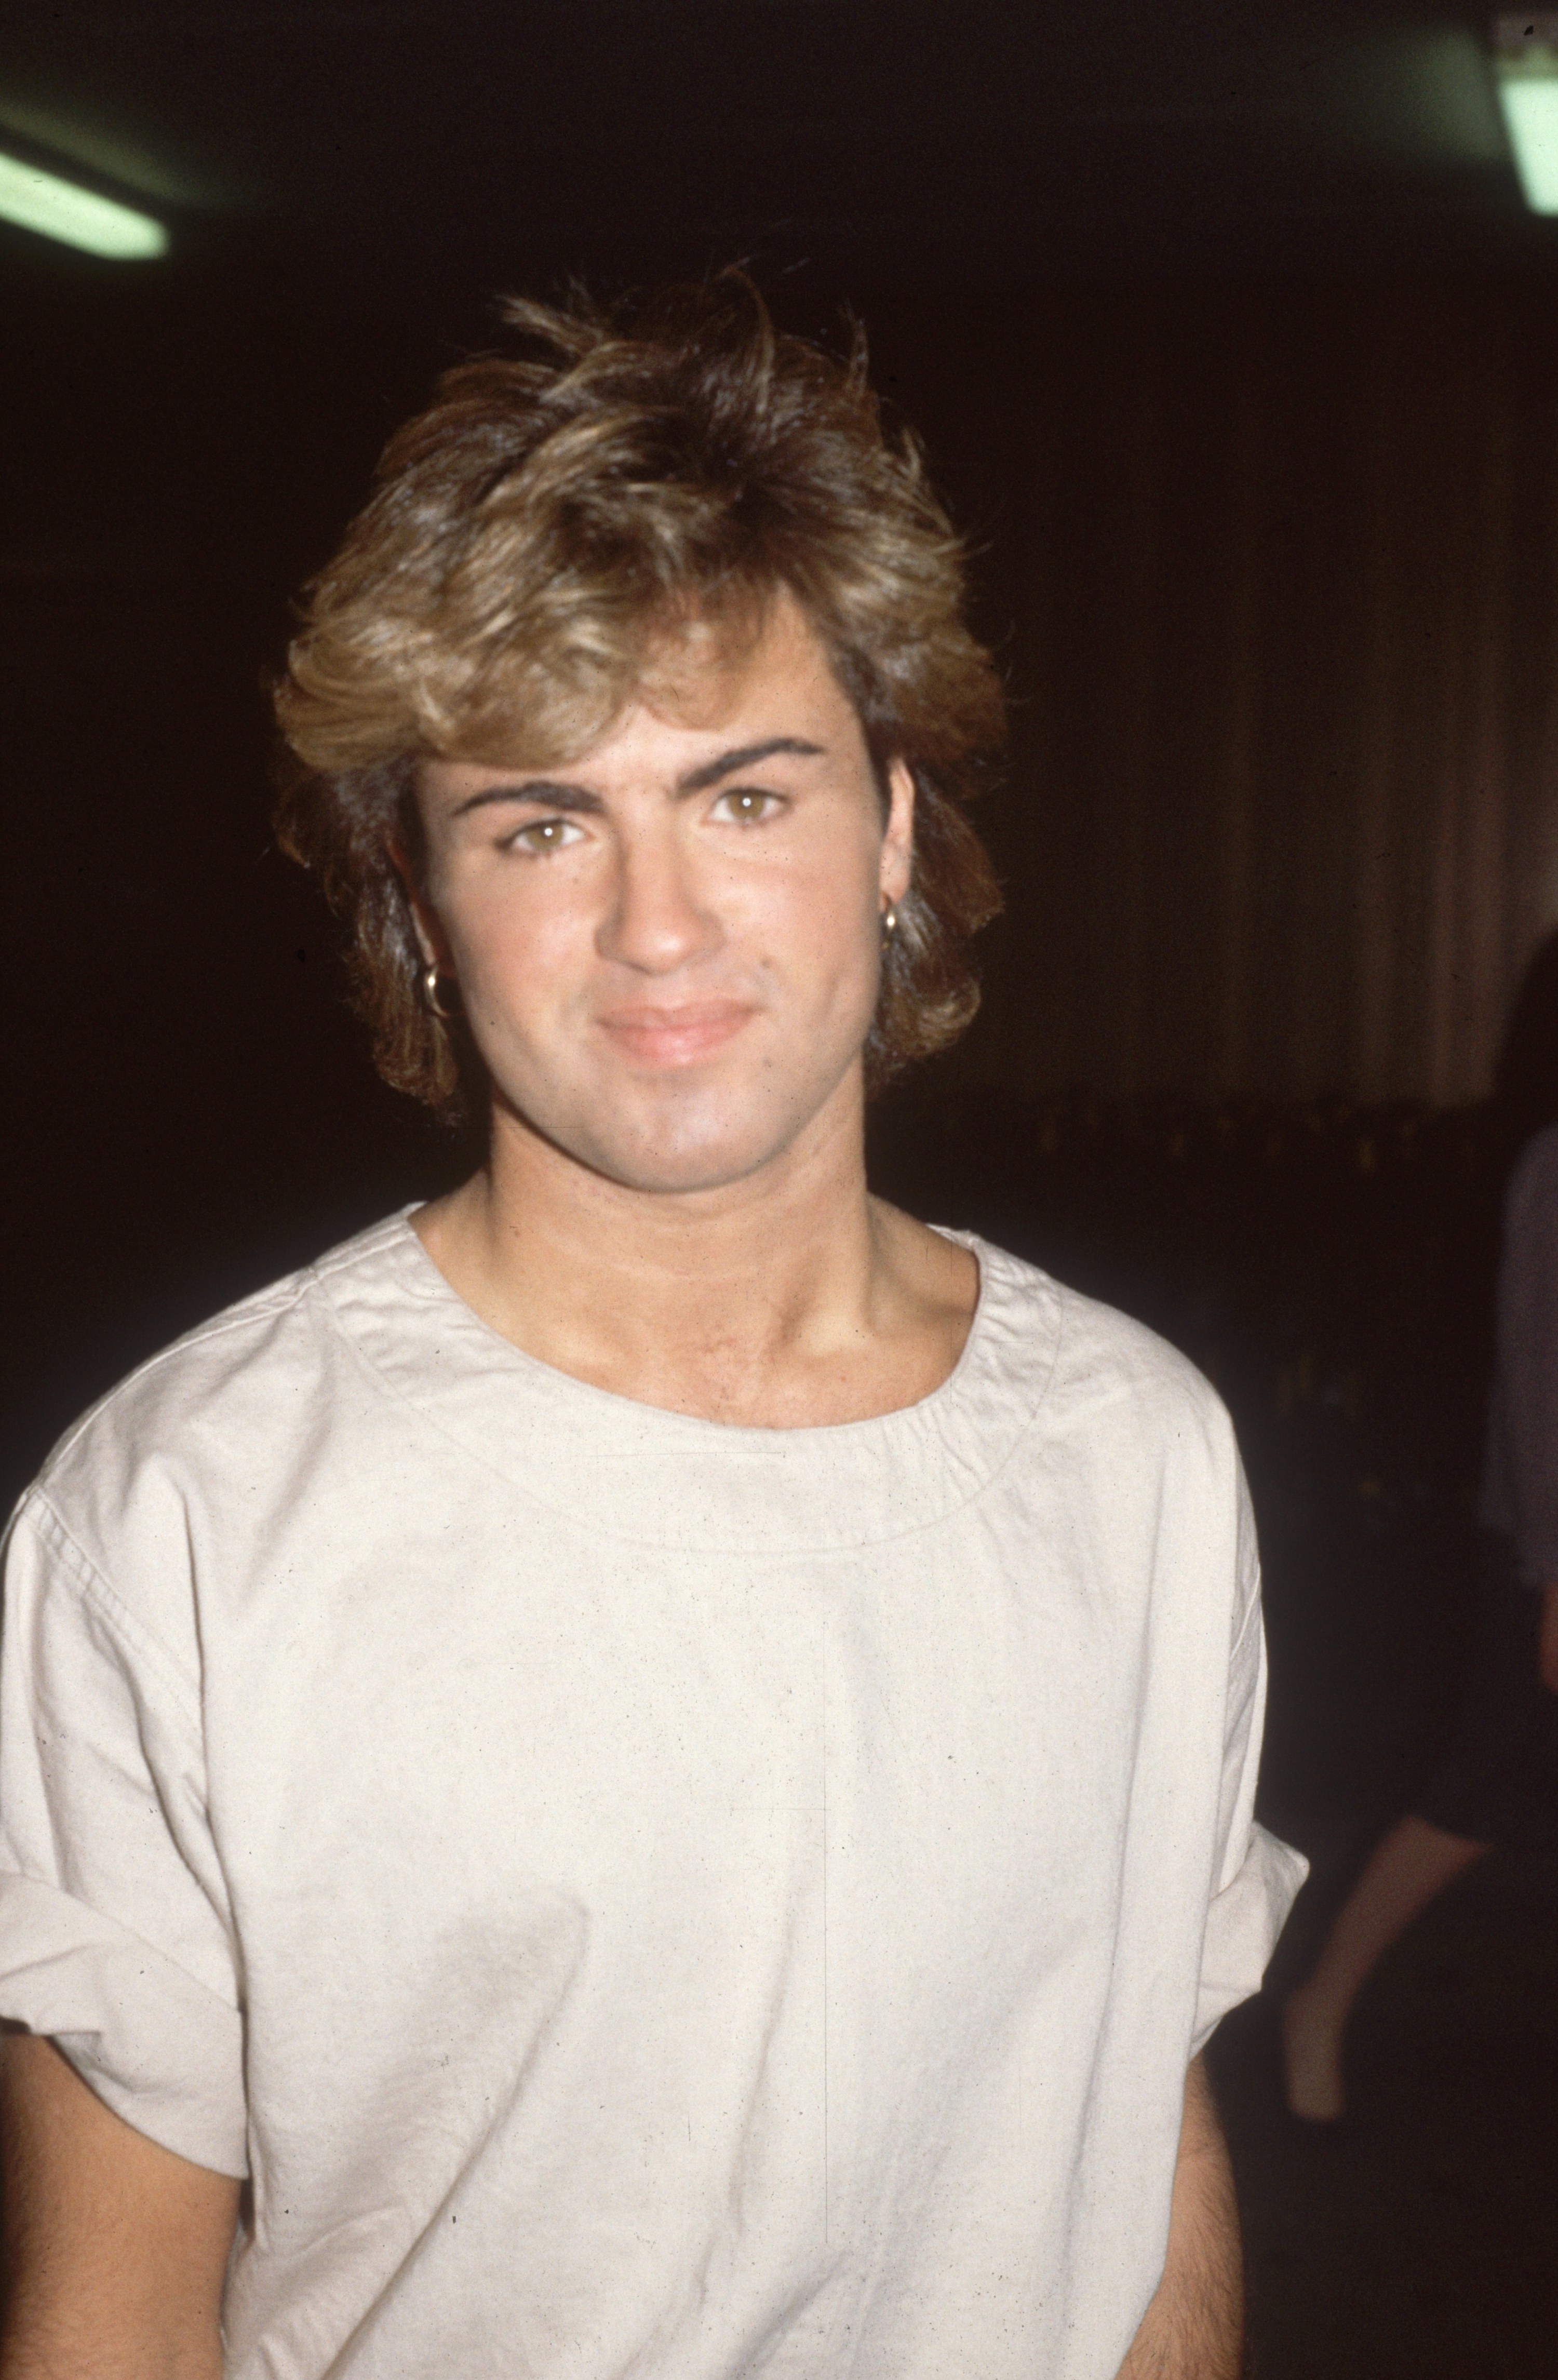 George Michael is pictured at Heathrow Airport in 1984